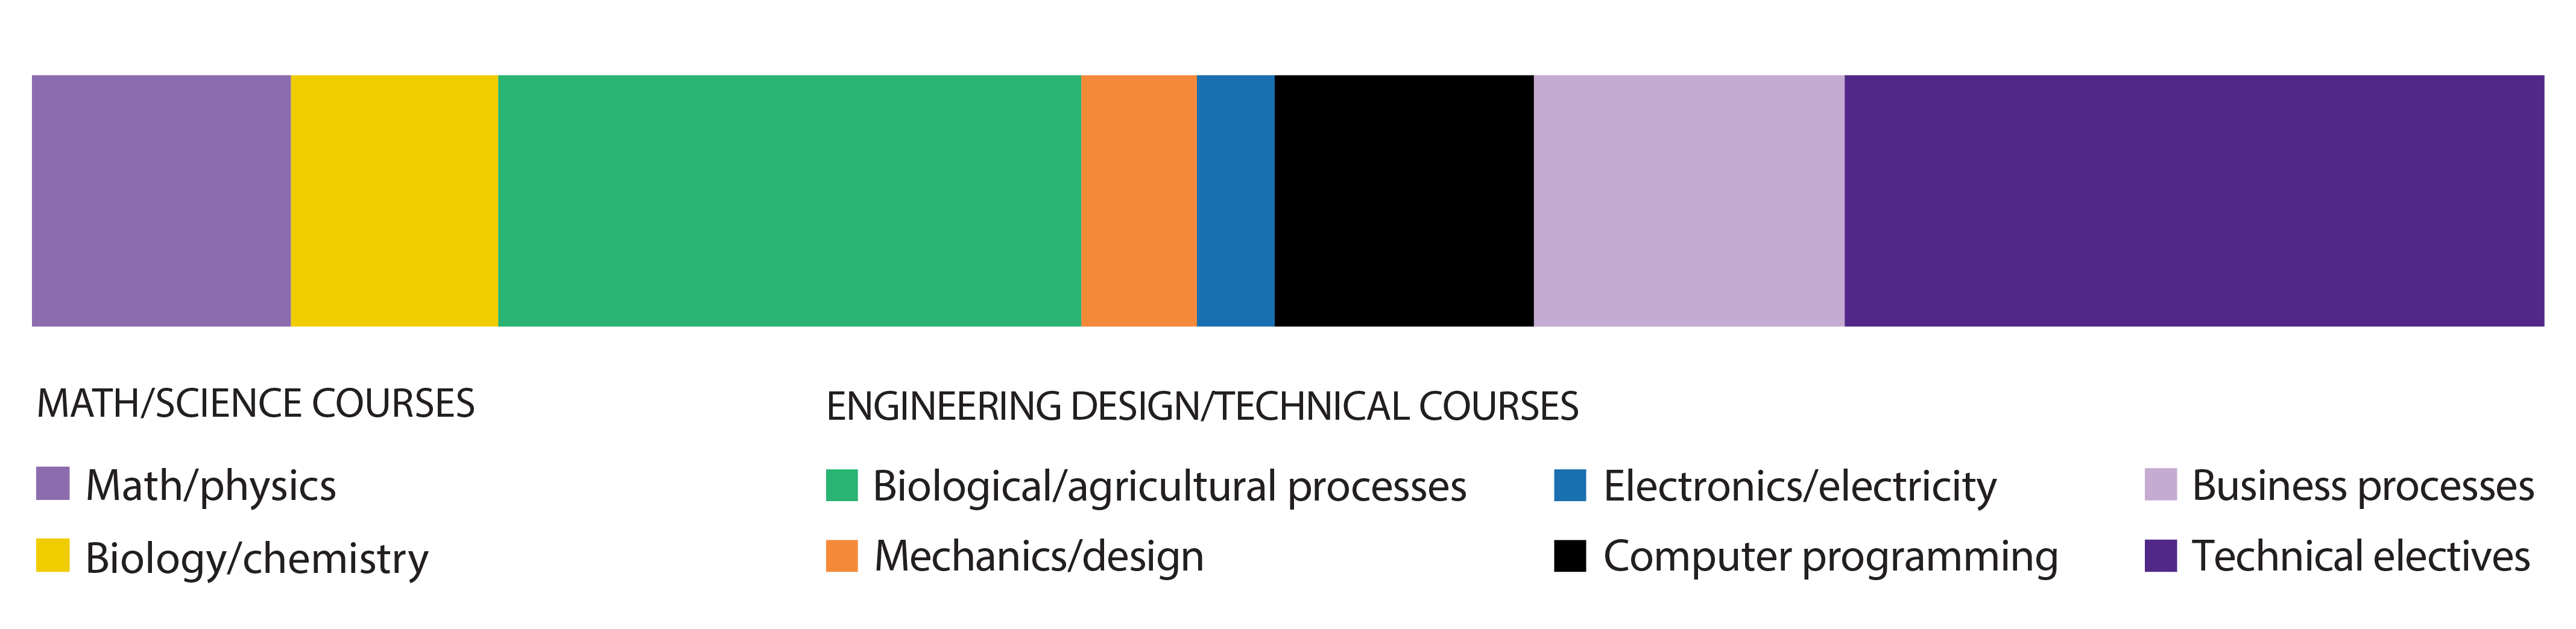 Academic areas graphic for agricultural technology management